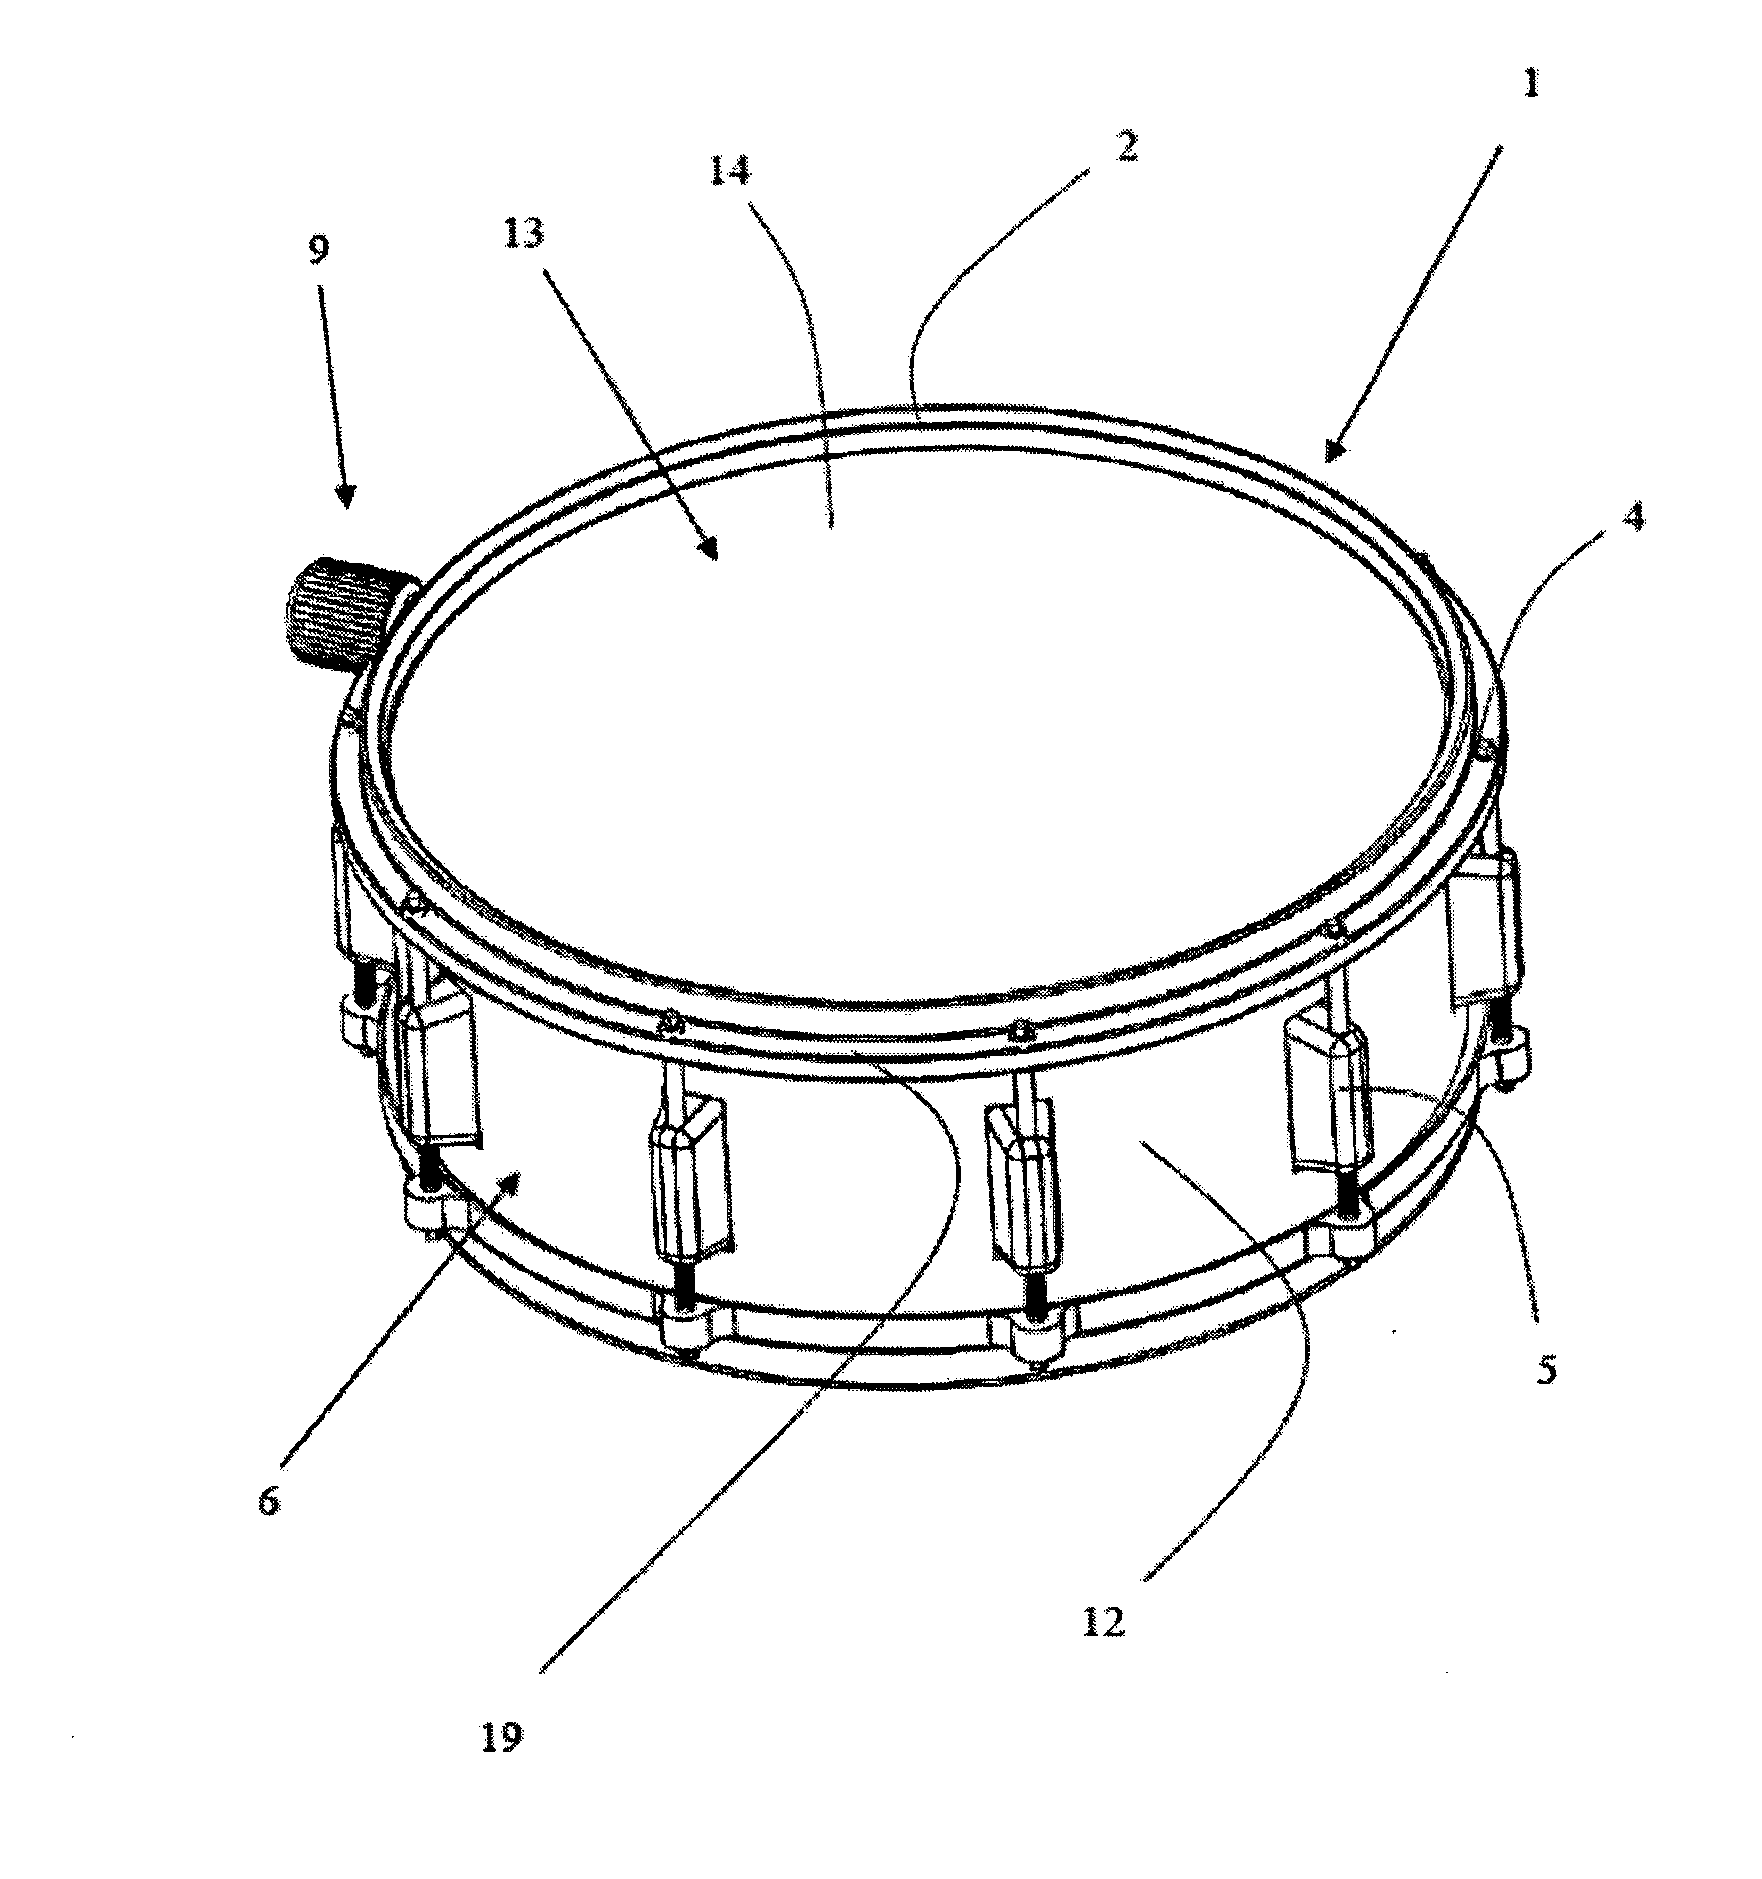 Tension Adjustment Hoop for a Membrane of a Musical Instrument